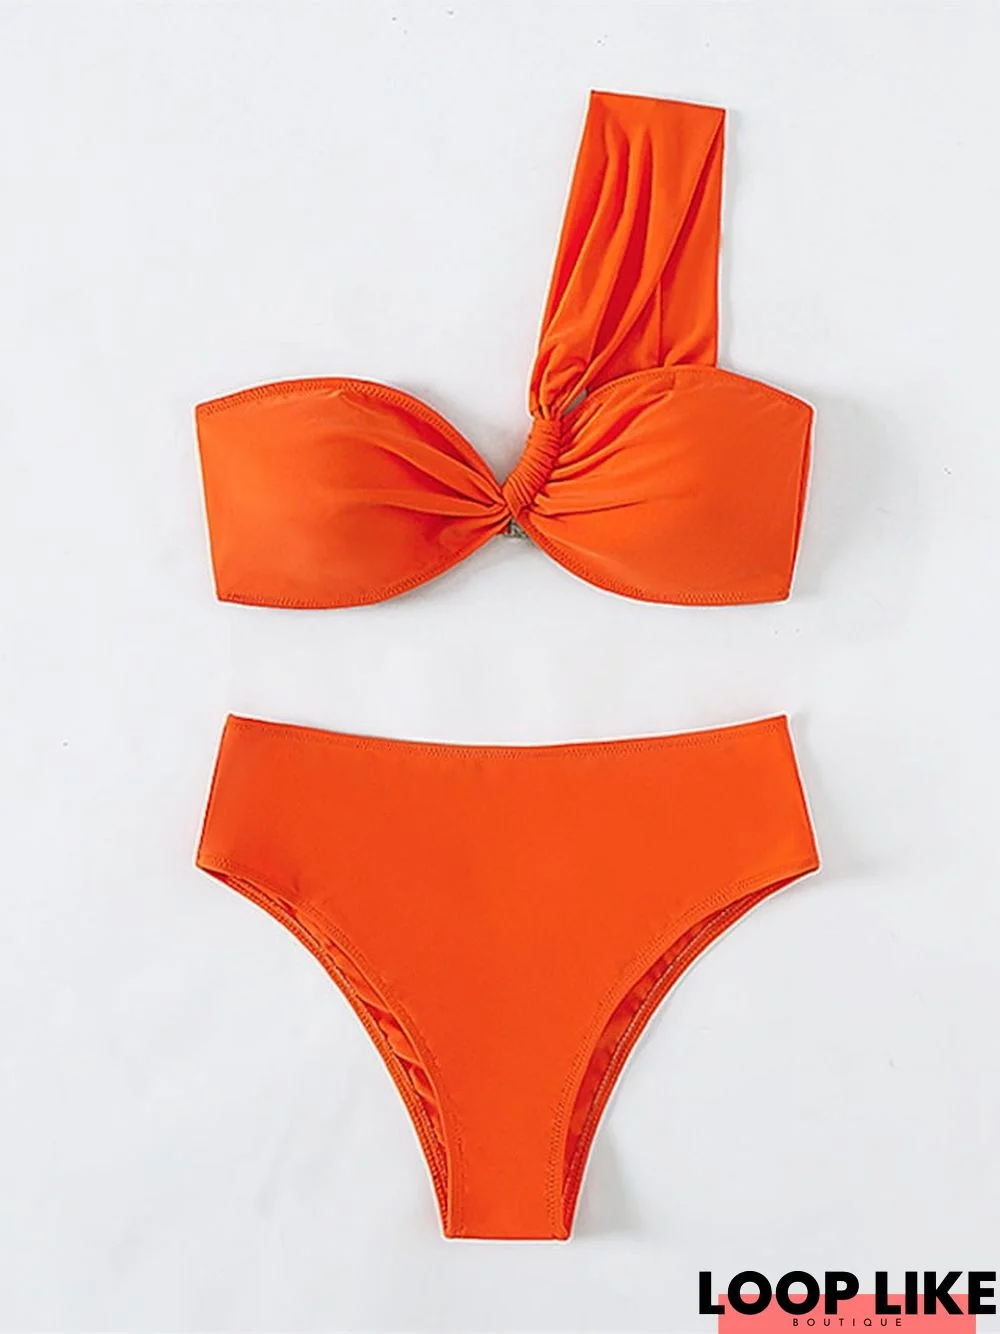 Women's Swimwear Bikini 2 Piece Normal Swimsuit Backless One Shoulder High Waisted Pure Color Orange Bathing Suits New Vacation Fashion